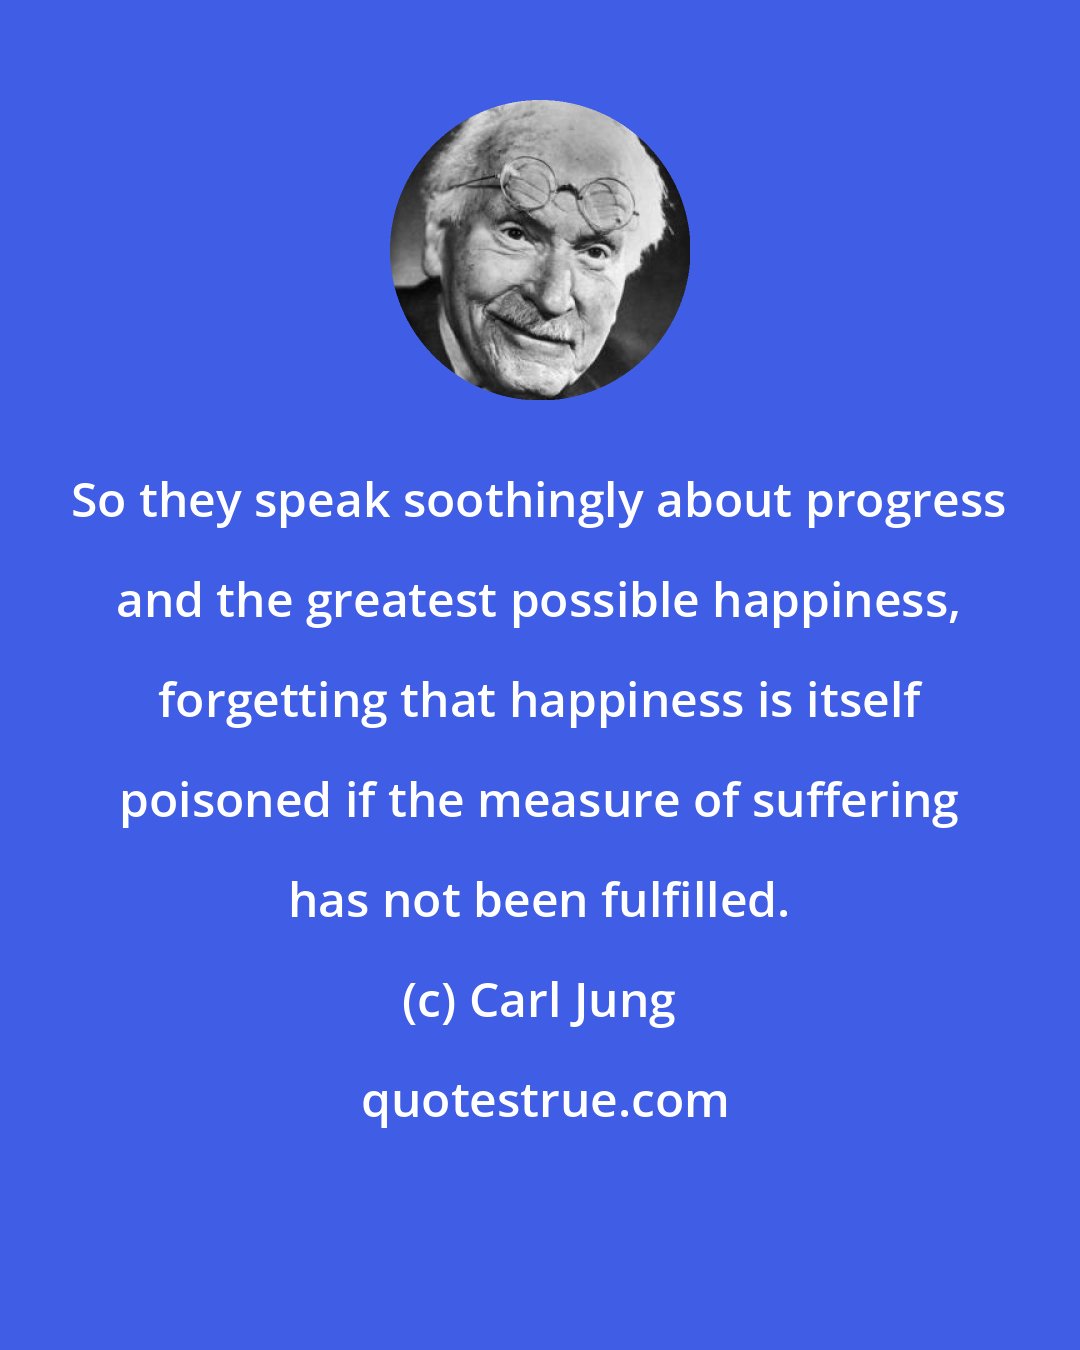 Carl Jung: So they speak soothingly about progress and the greatest possible happiness, forgetting that happiness is itself poisoned if the measure of suffering has not been fulfilled.